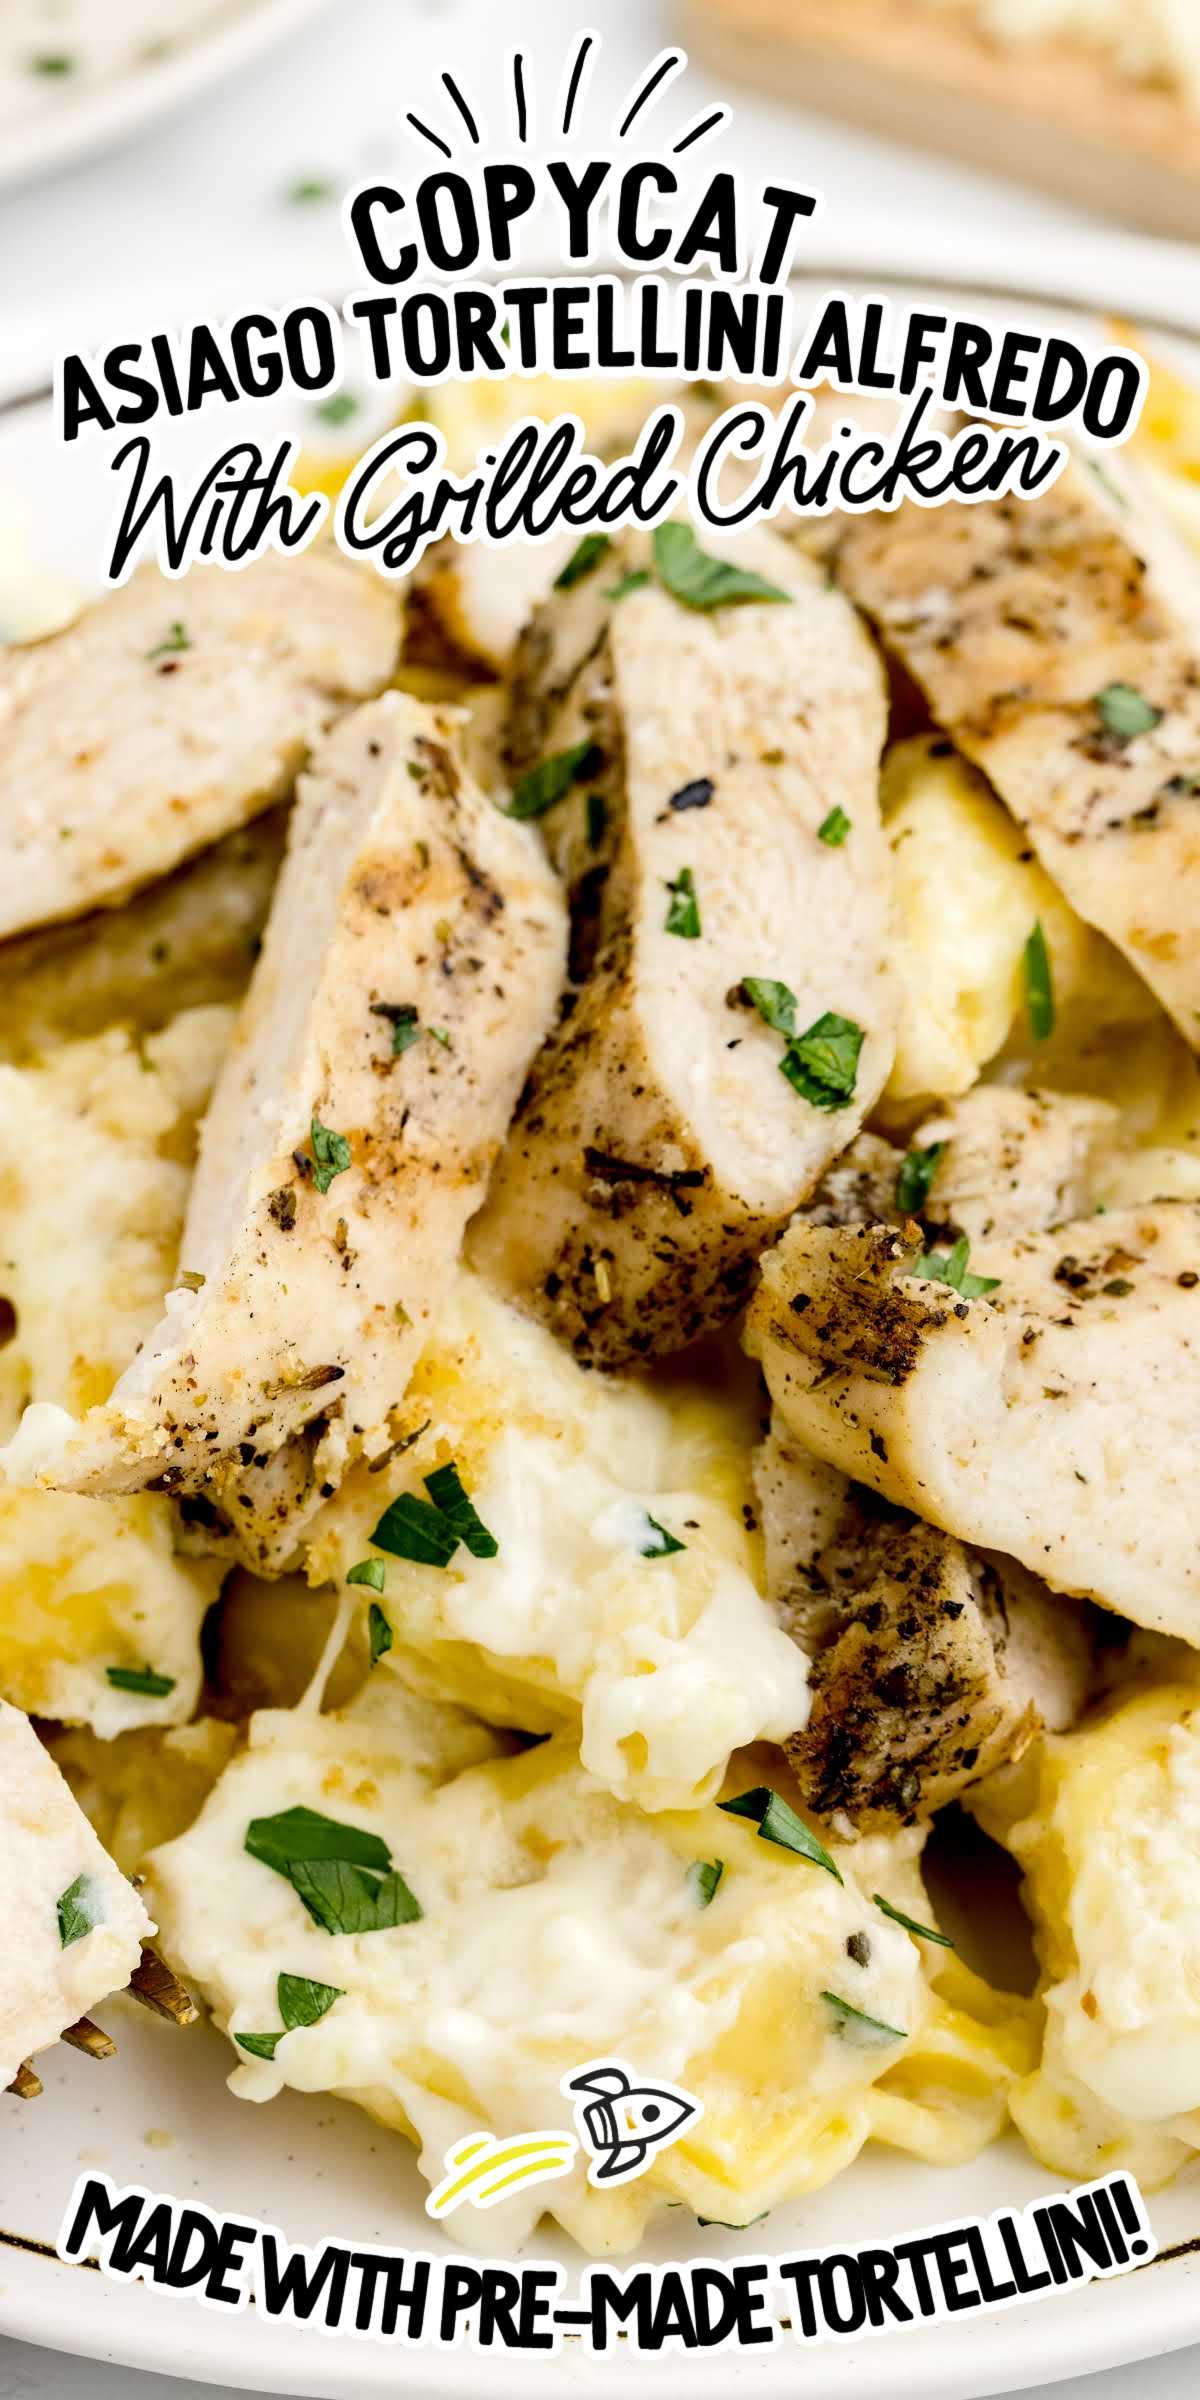 Asiago Tortellini Alfredo With Grilled Chicken - Spaceships and Laser Beams